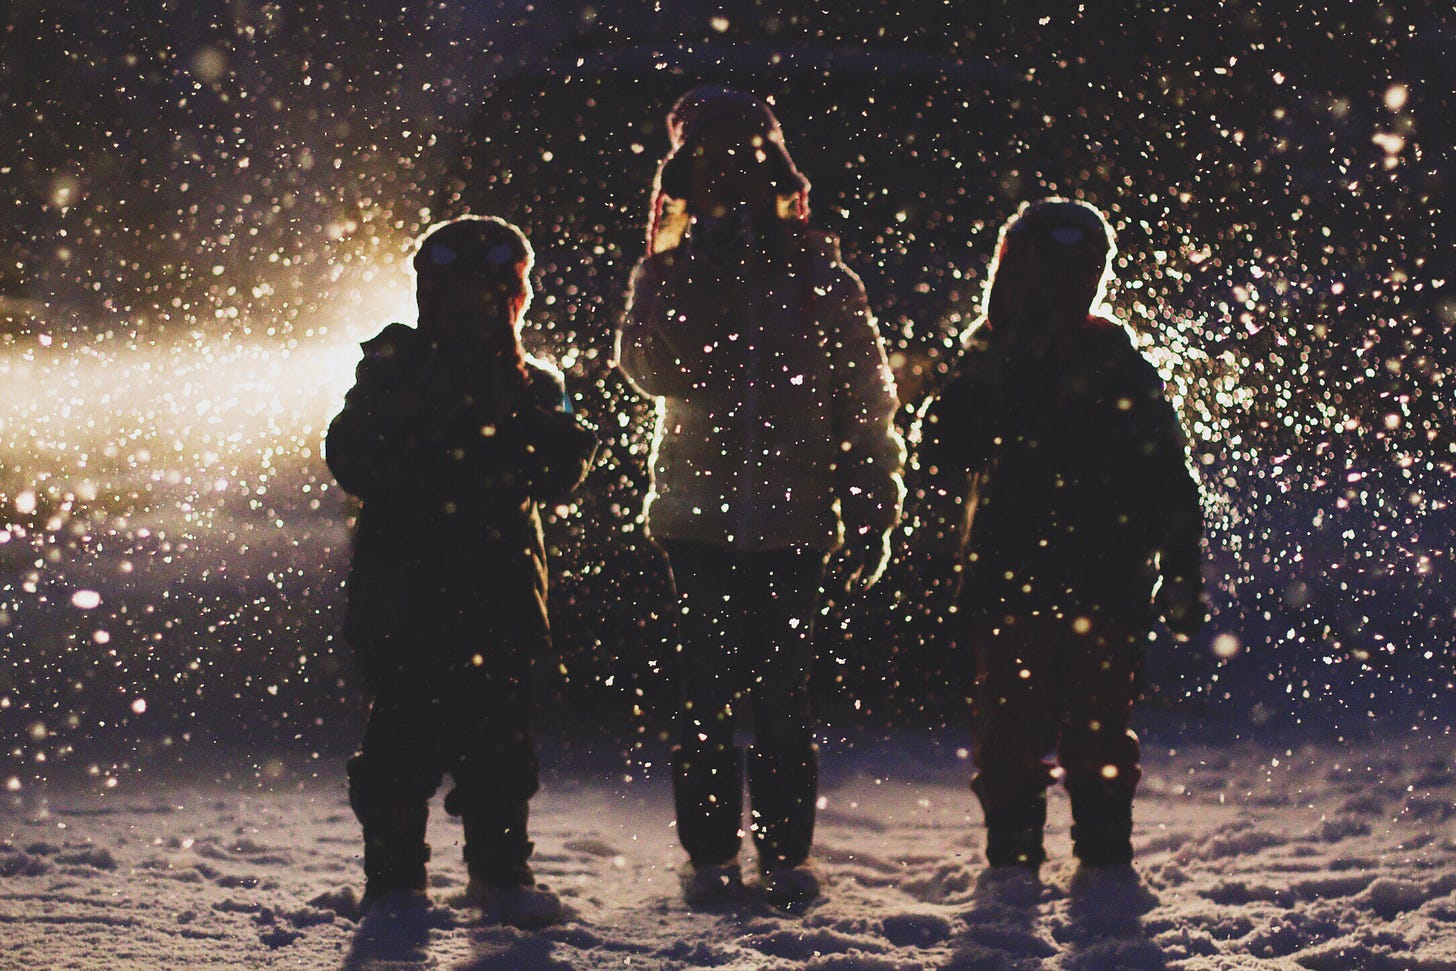 The silhouette of three children standing in the snow.